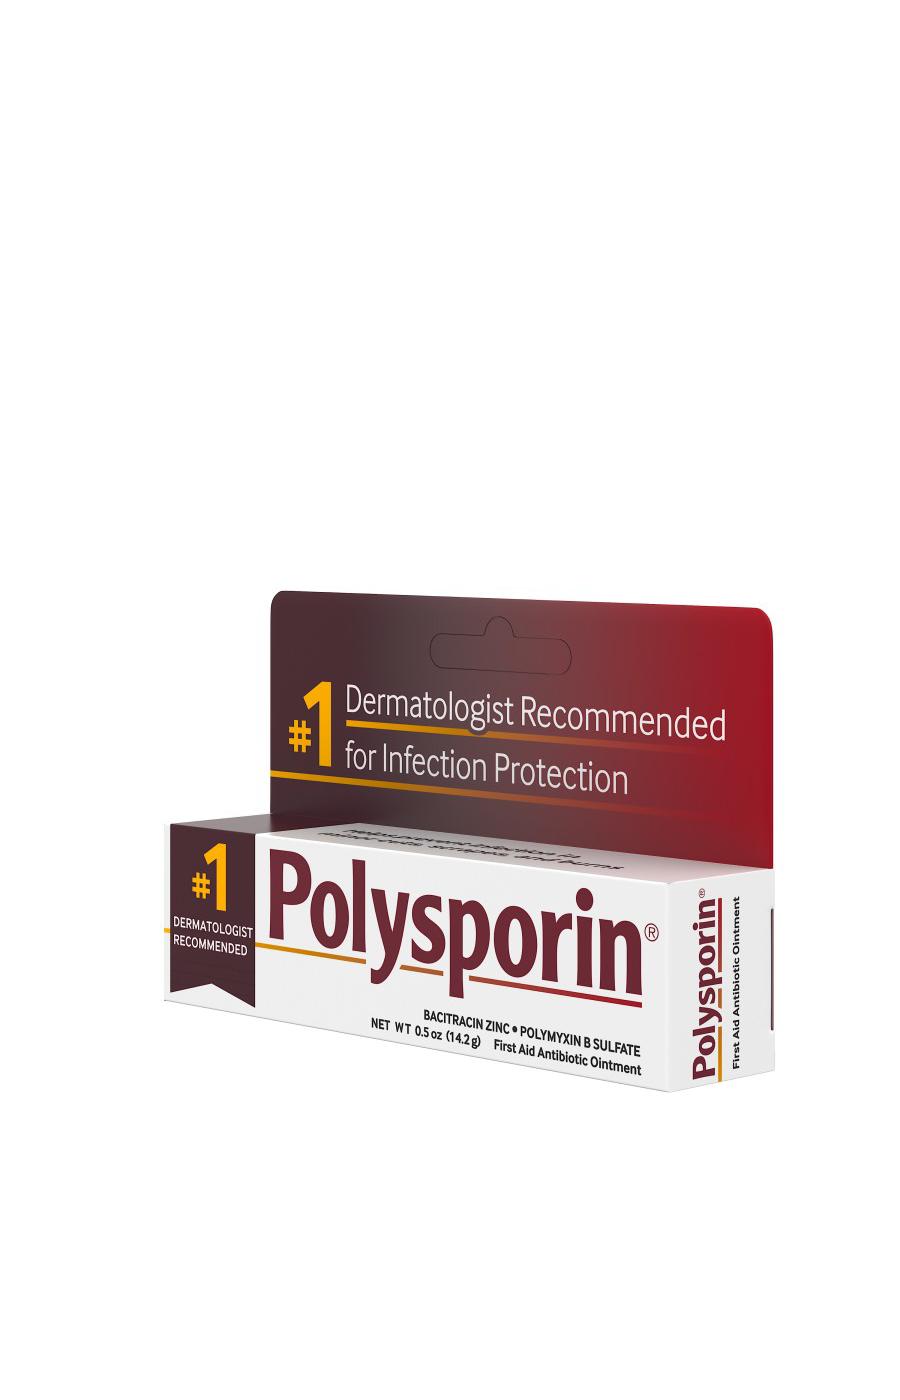 Polysporin First Aid Antibiotic Ointment; image 4 of 5